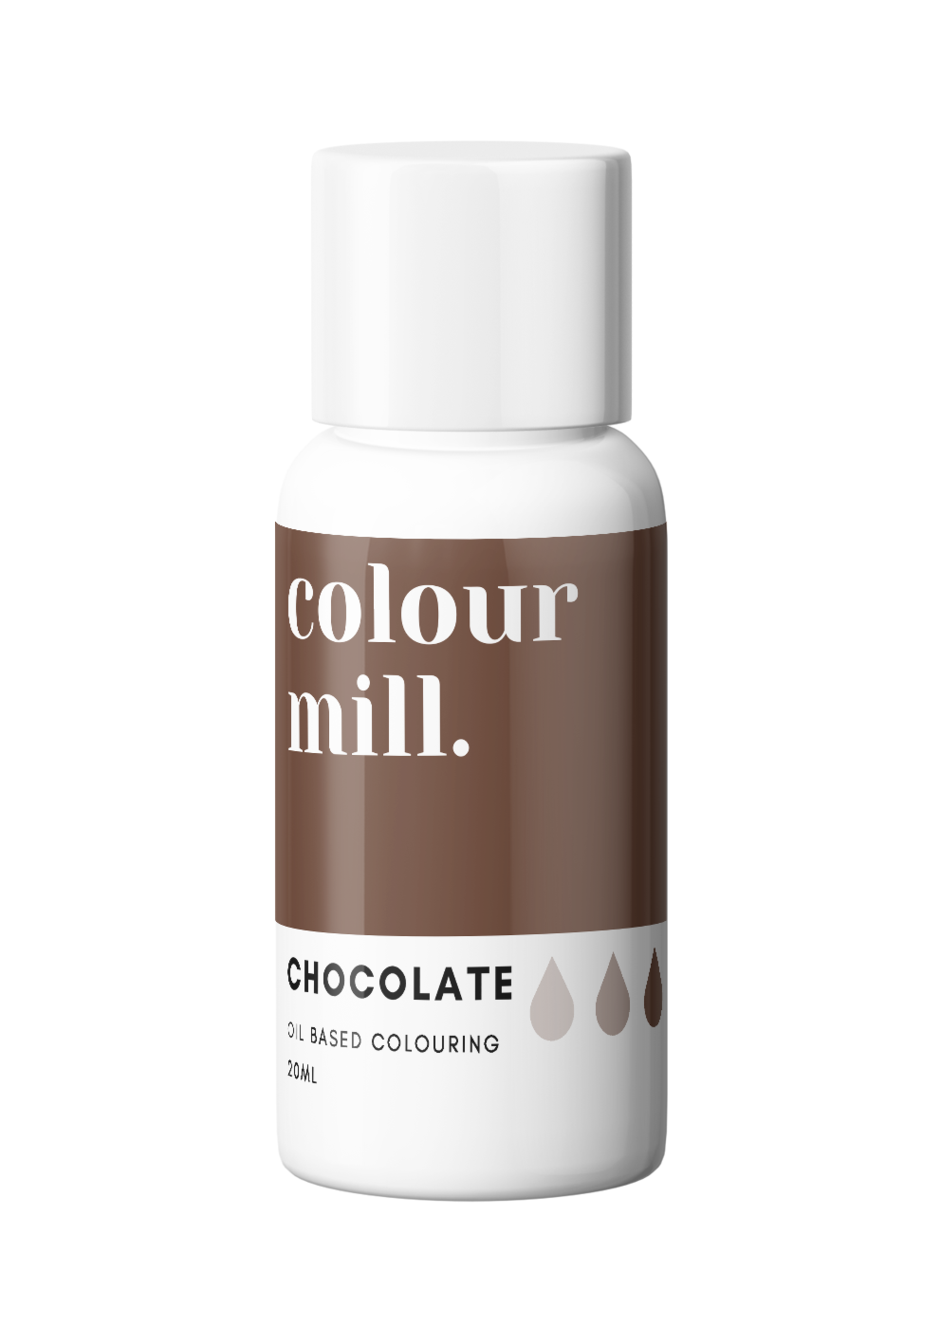 Chocolate, 20ml, Colour Mill Oil Based Colouring